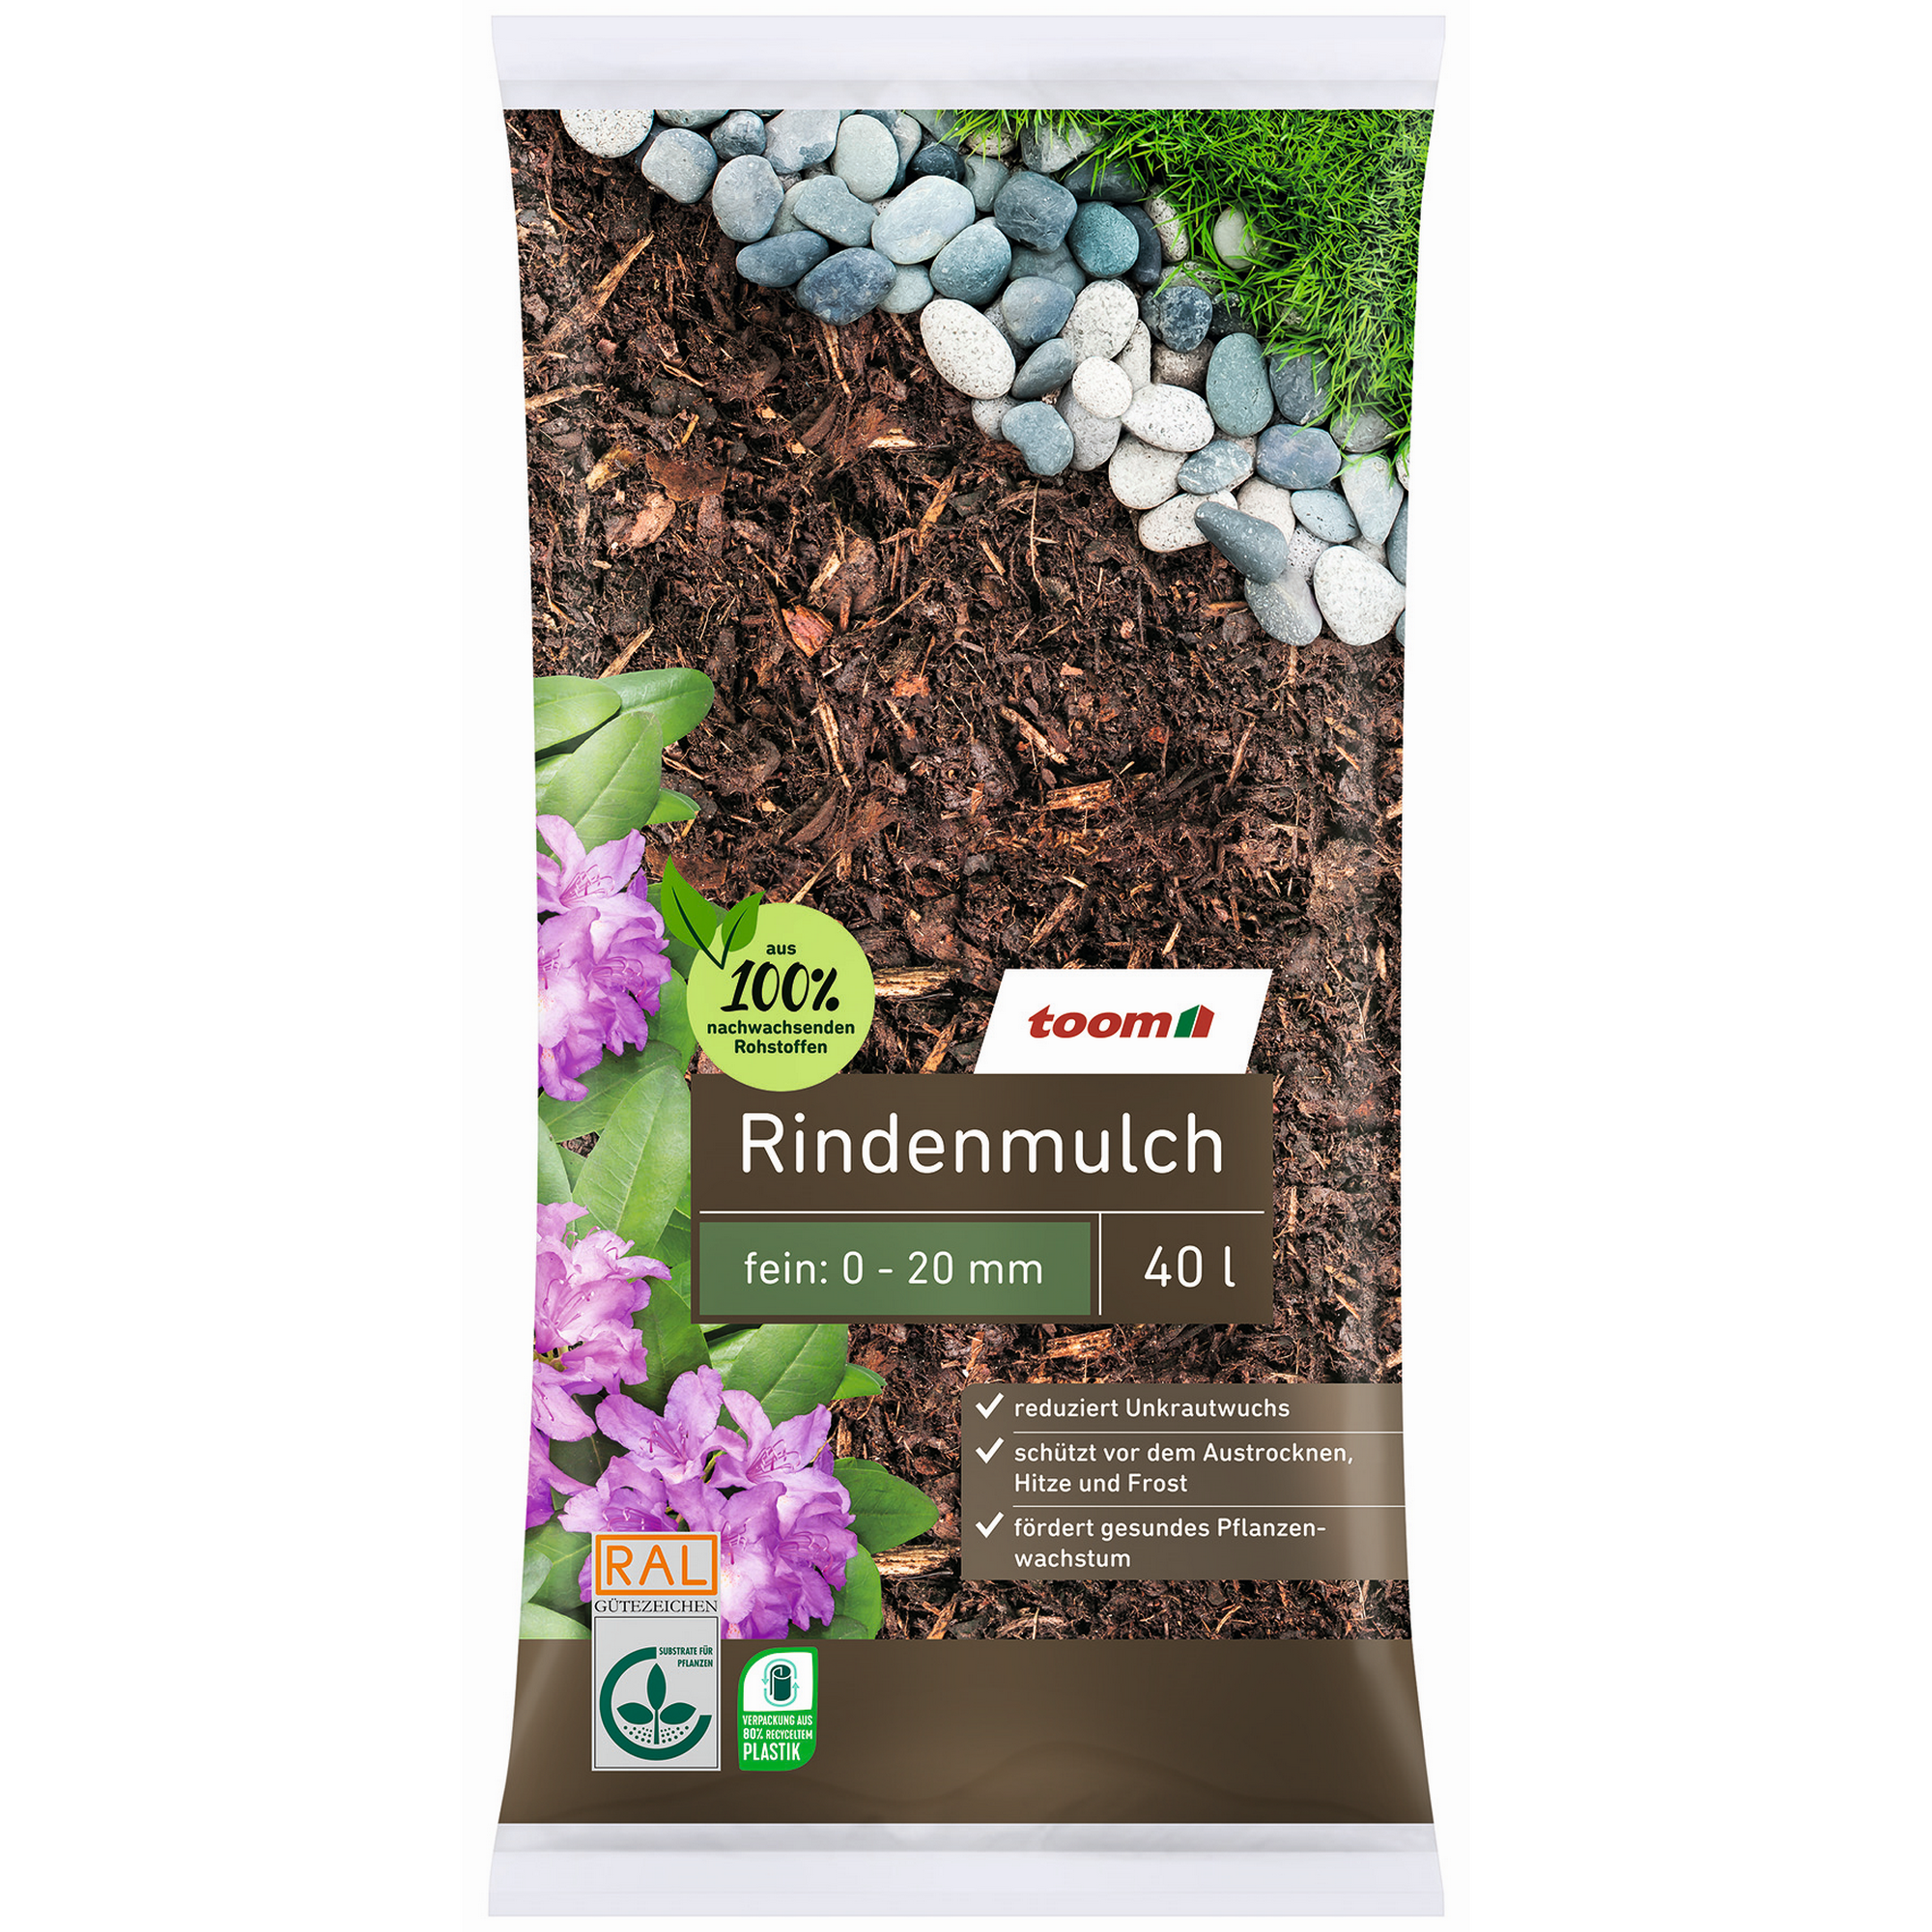 Rindenmulch 0-20 mm 40 l + product picture